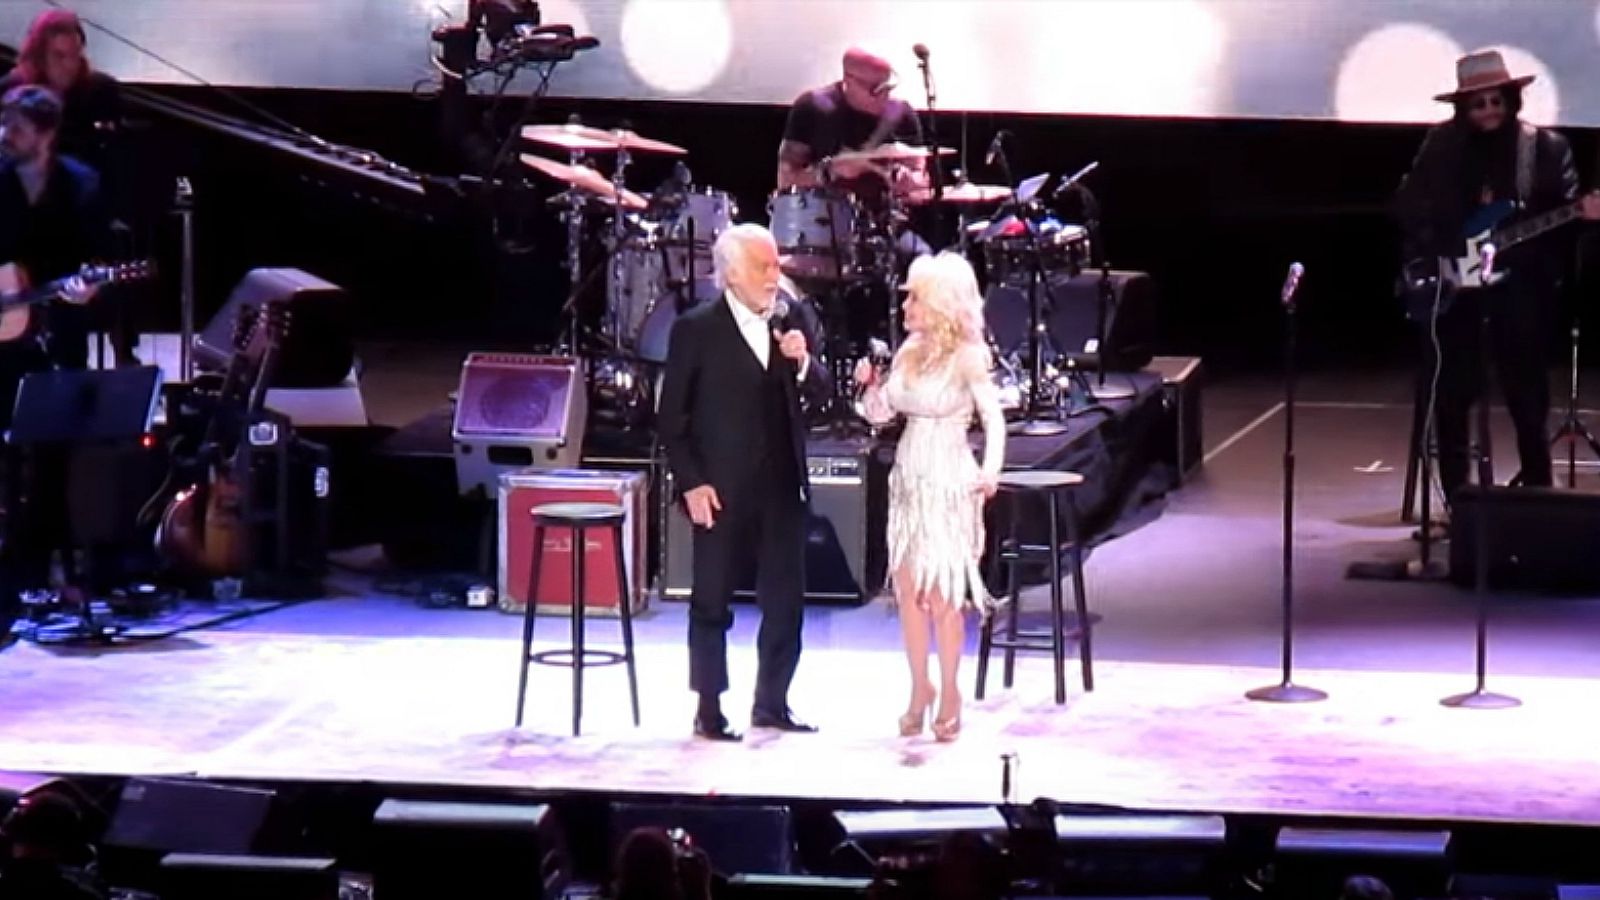 Kenny Rogers and Dolly Parton Sing Their Final Duet and Brings the Audience to Tears